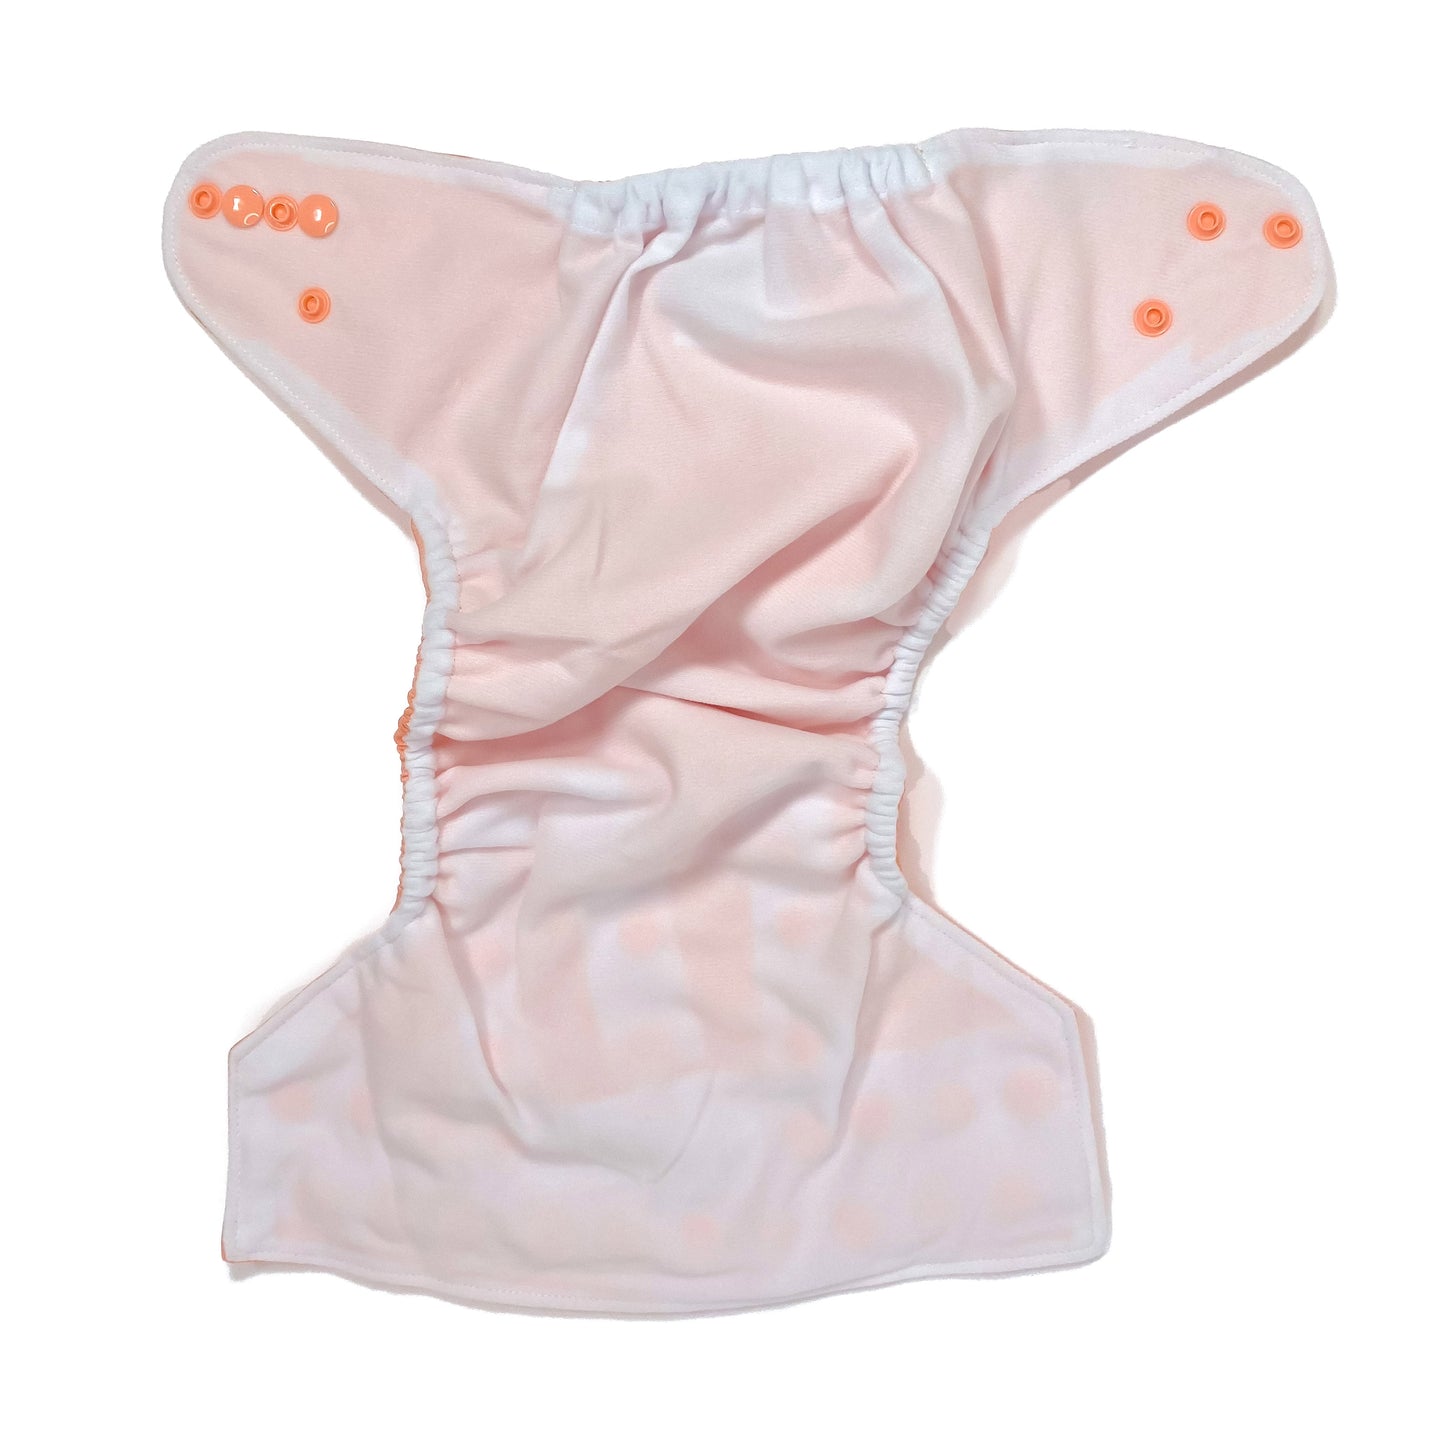 An adjustable reusable nappy for babies and toddlers, in a bright coral colour. View shows the inside fabric of the nappy.